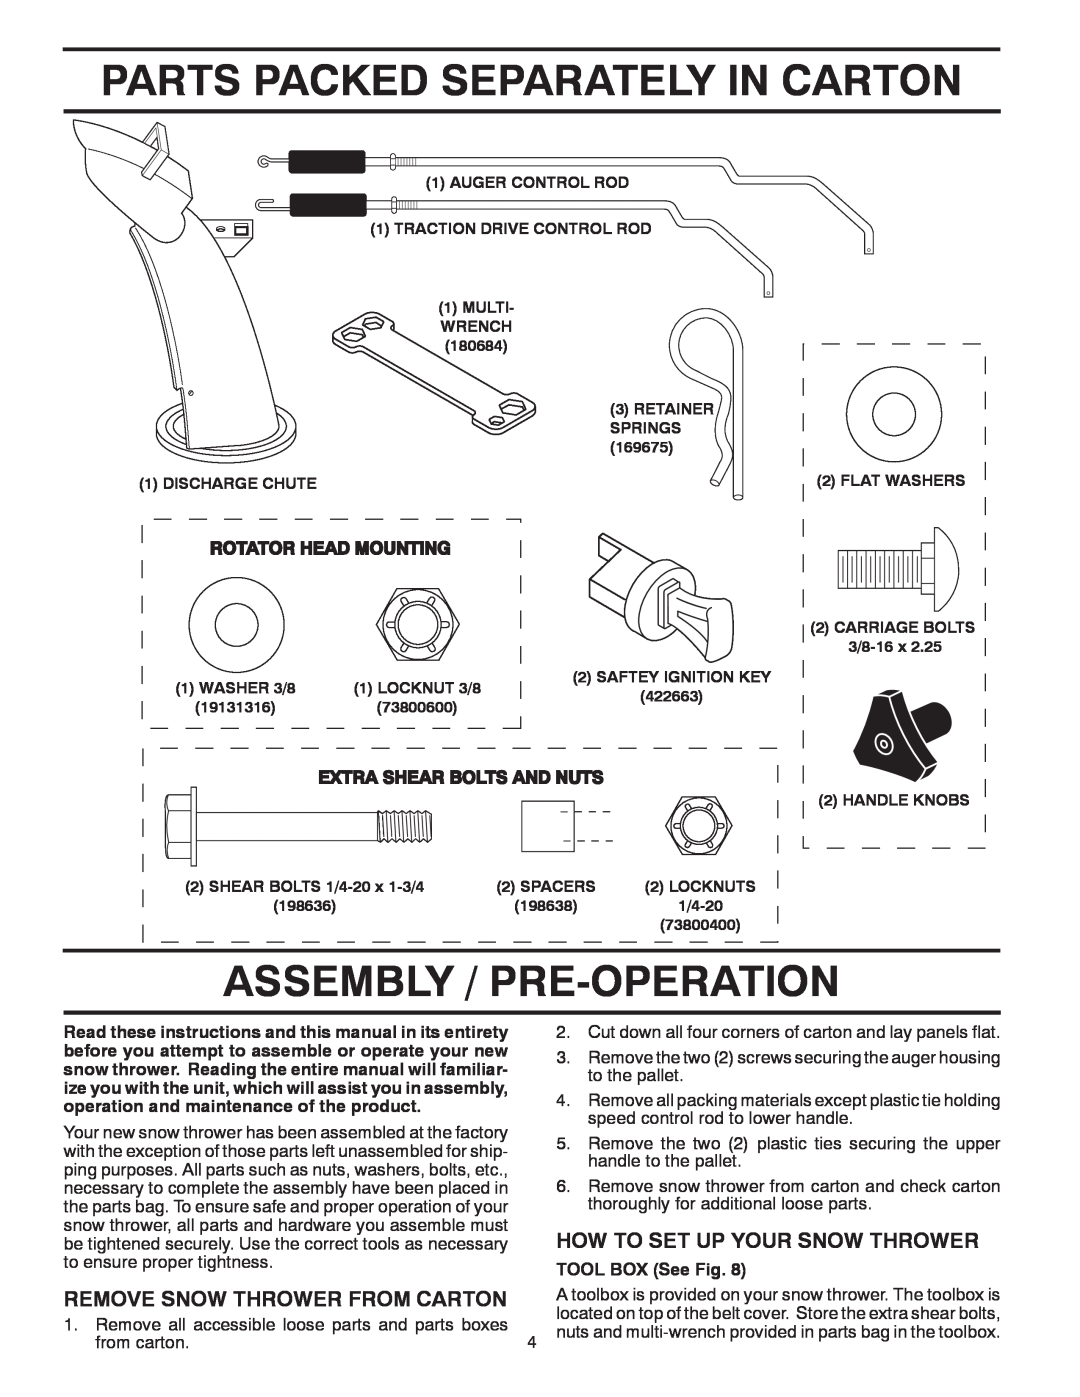 Poulan 421888 owner manual Parts Packed Separately In Carton, Assembly / Pre-Operation, How To Set Up Your Snow Thrower 